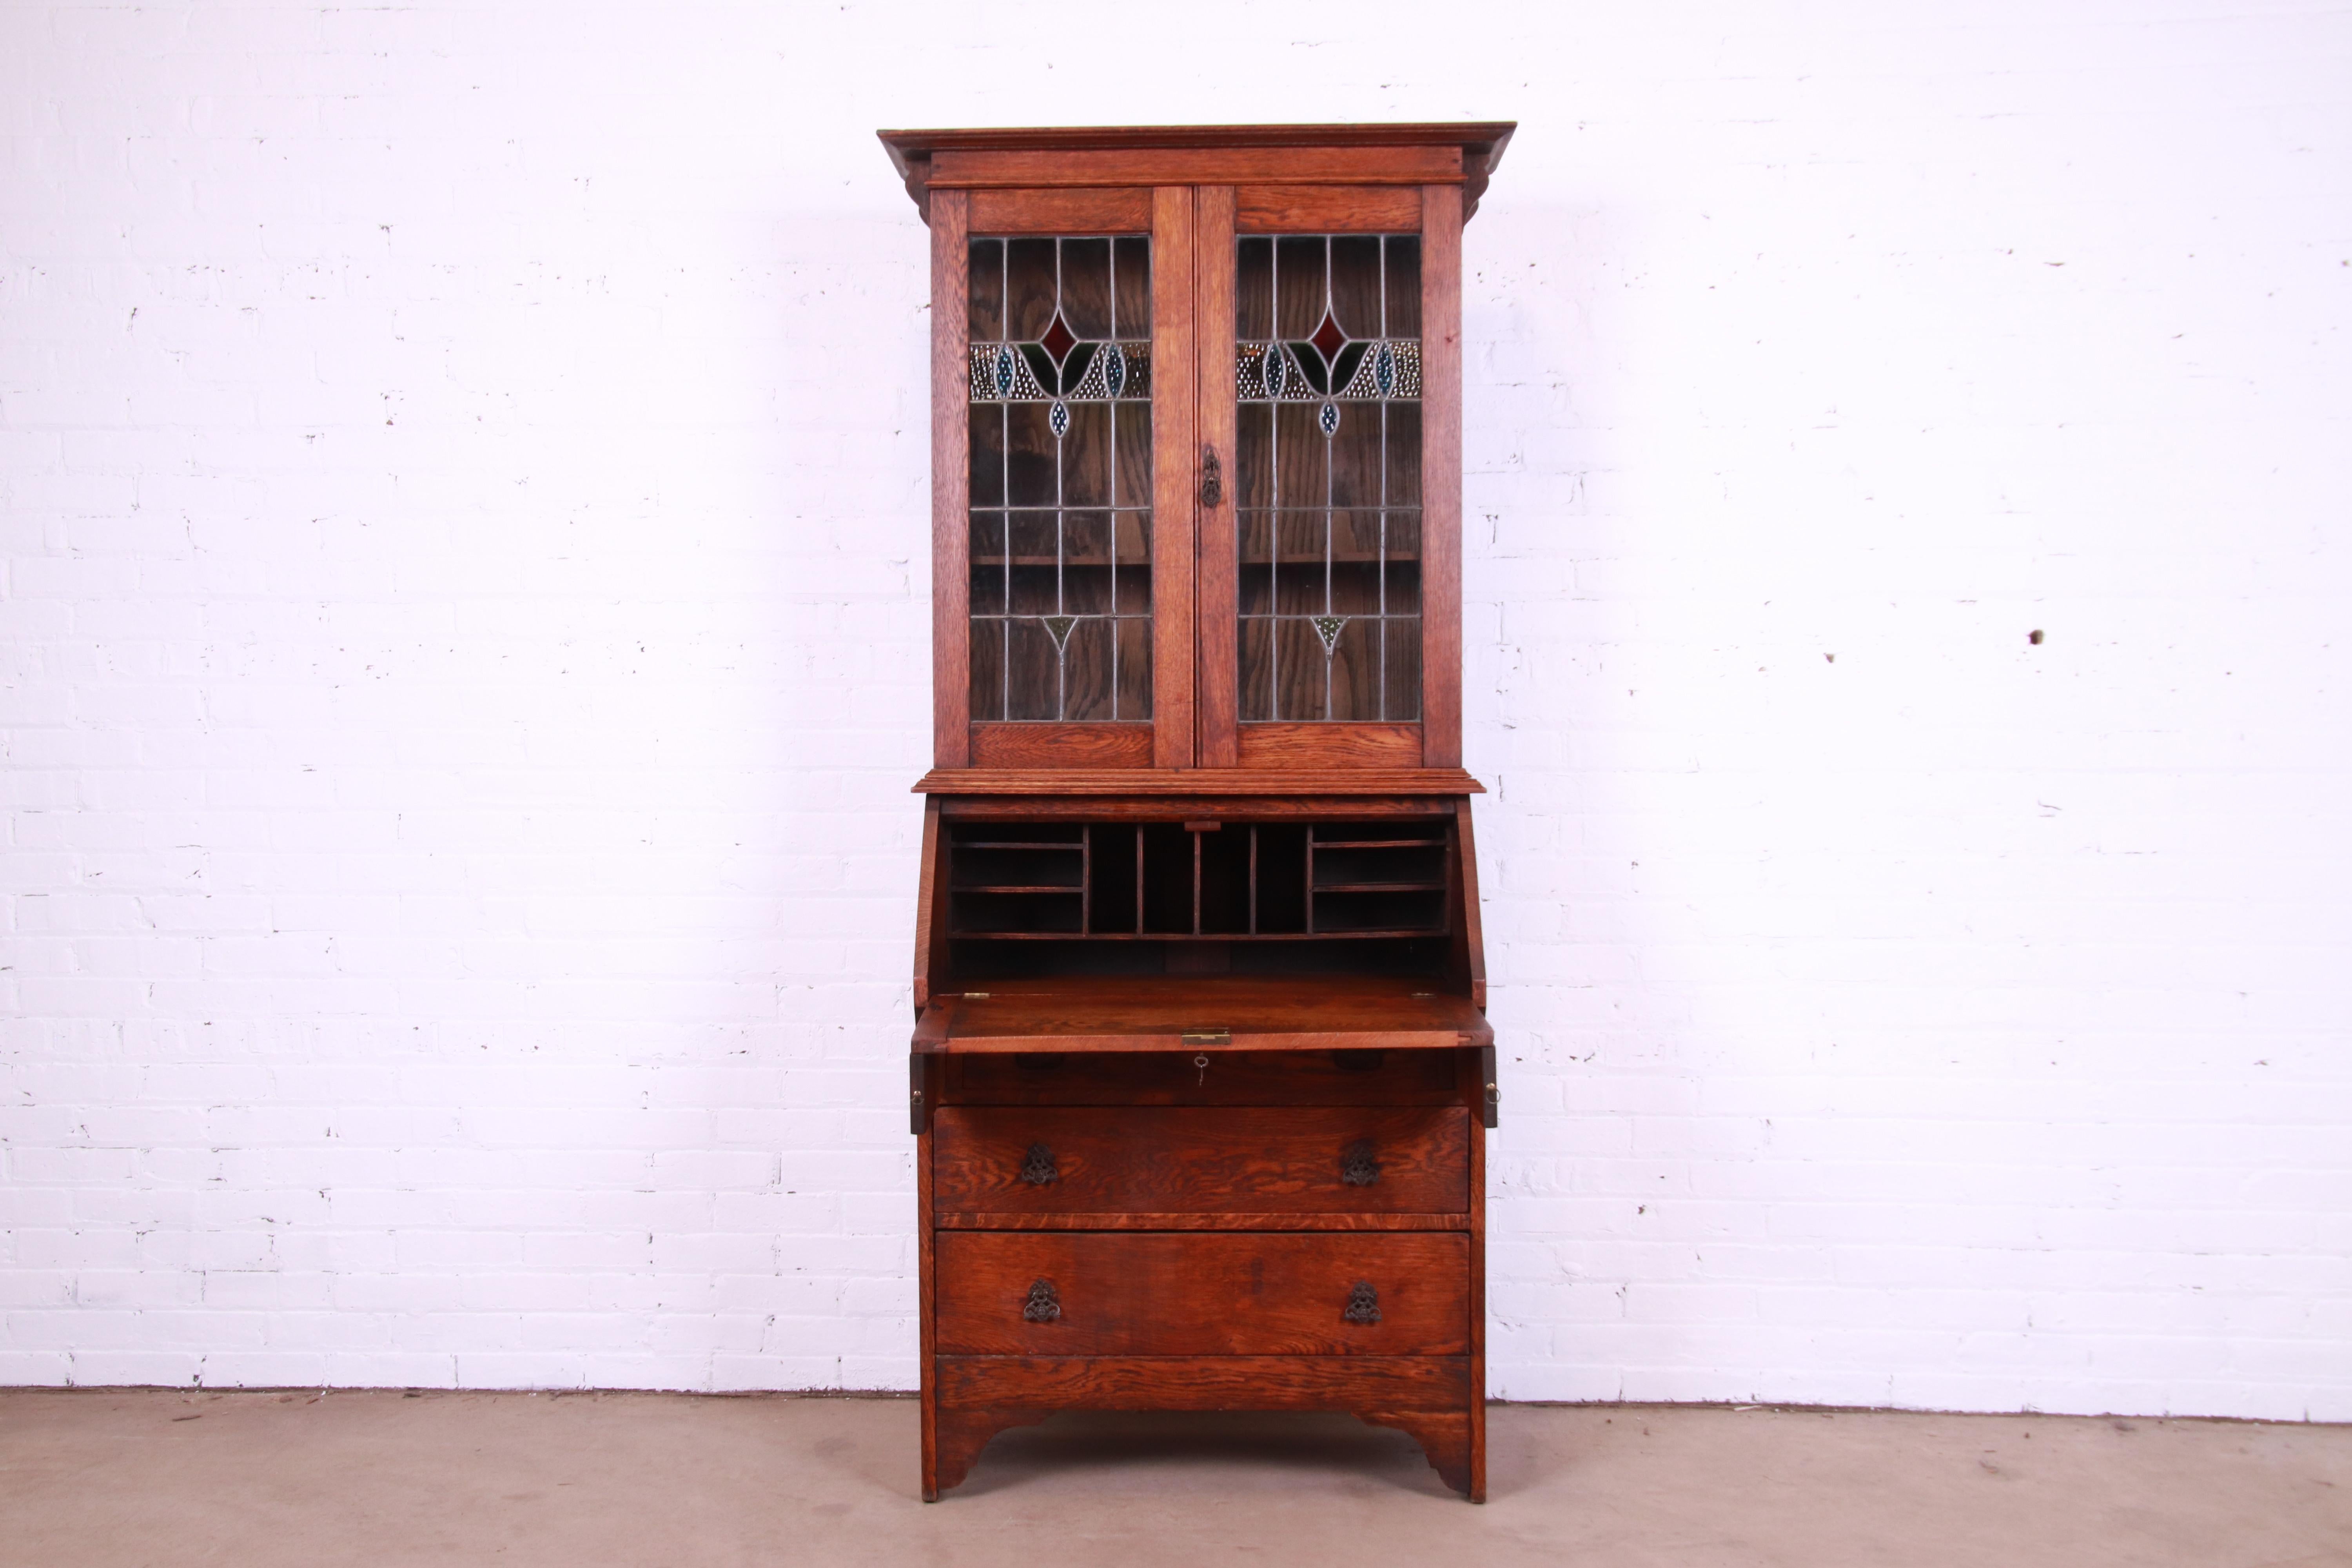 American Mission Oak Arts & Crafts Secretary Desk with Stained Glass Bookcase Hutch